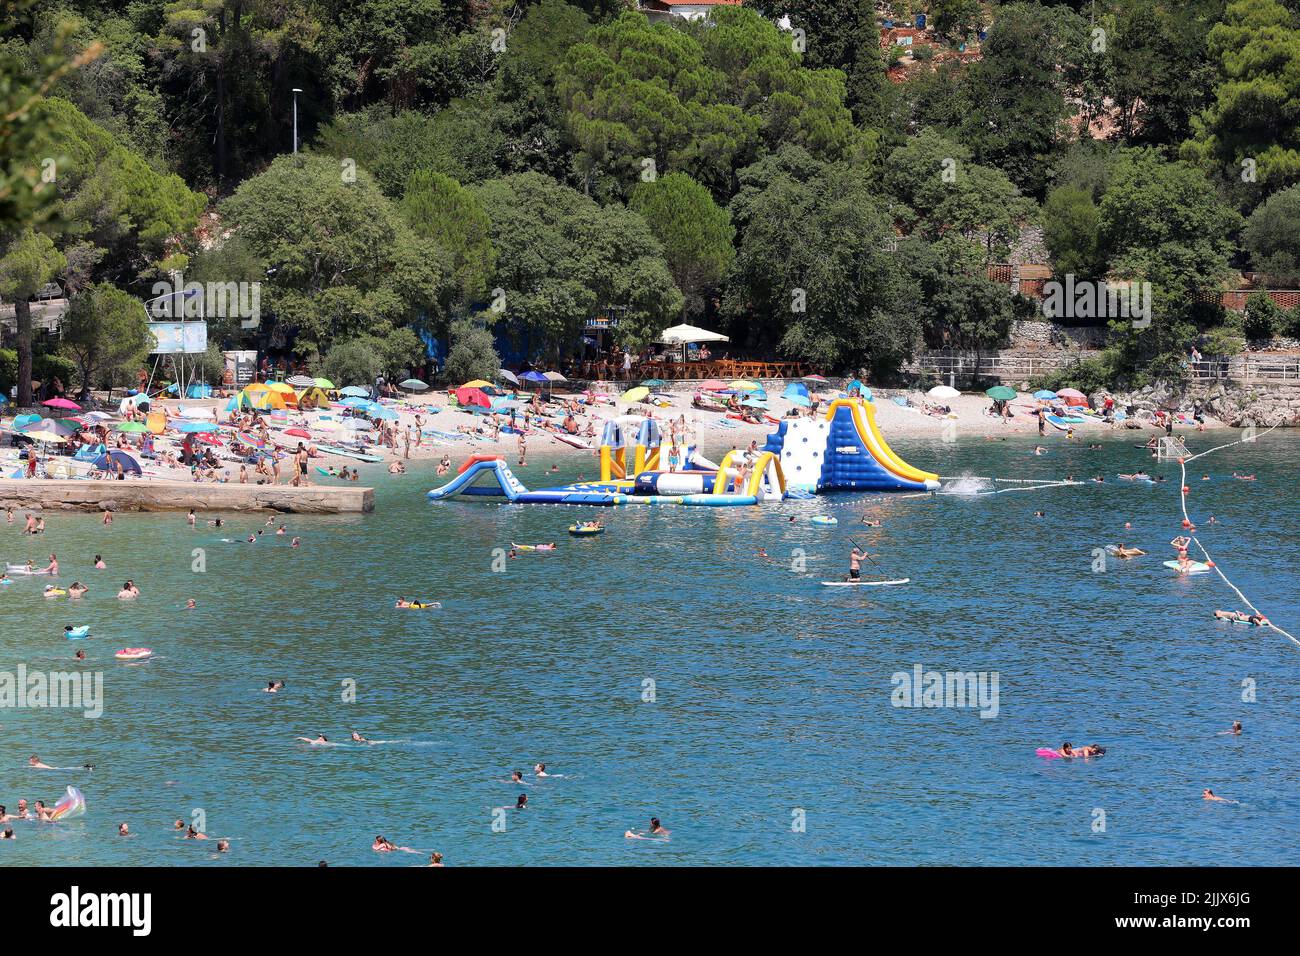 A large number of people found salvation from the unbearable heat on the beach, in Medveja, Croatia, on July 28, 2022. Photo: Goran Kovacic/PIXSELL Stock Photo